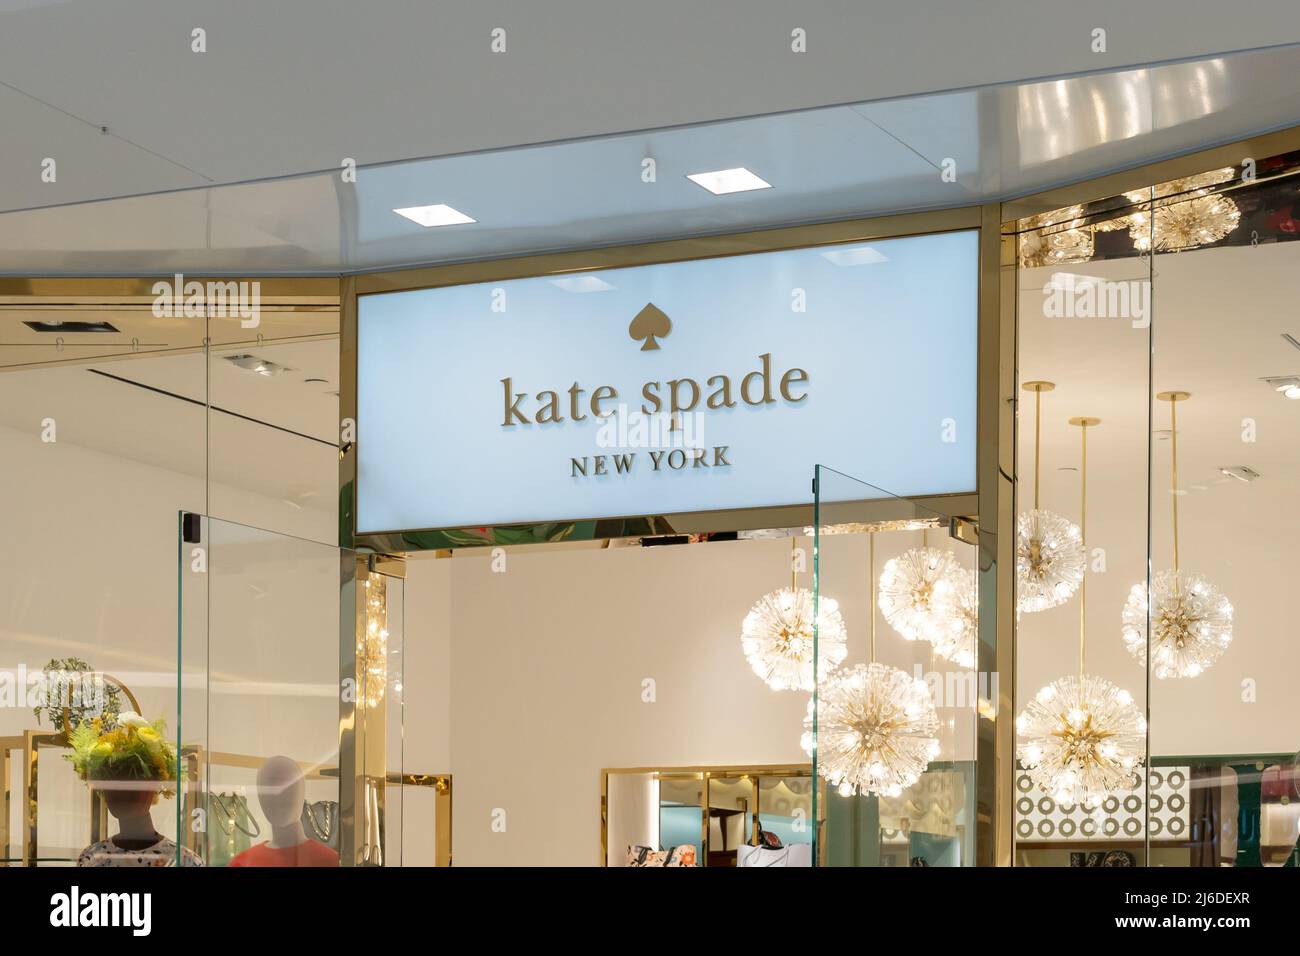 Kate Spade Fashion Designer Photos and Premium High Res Pictures